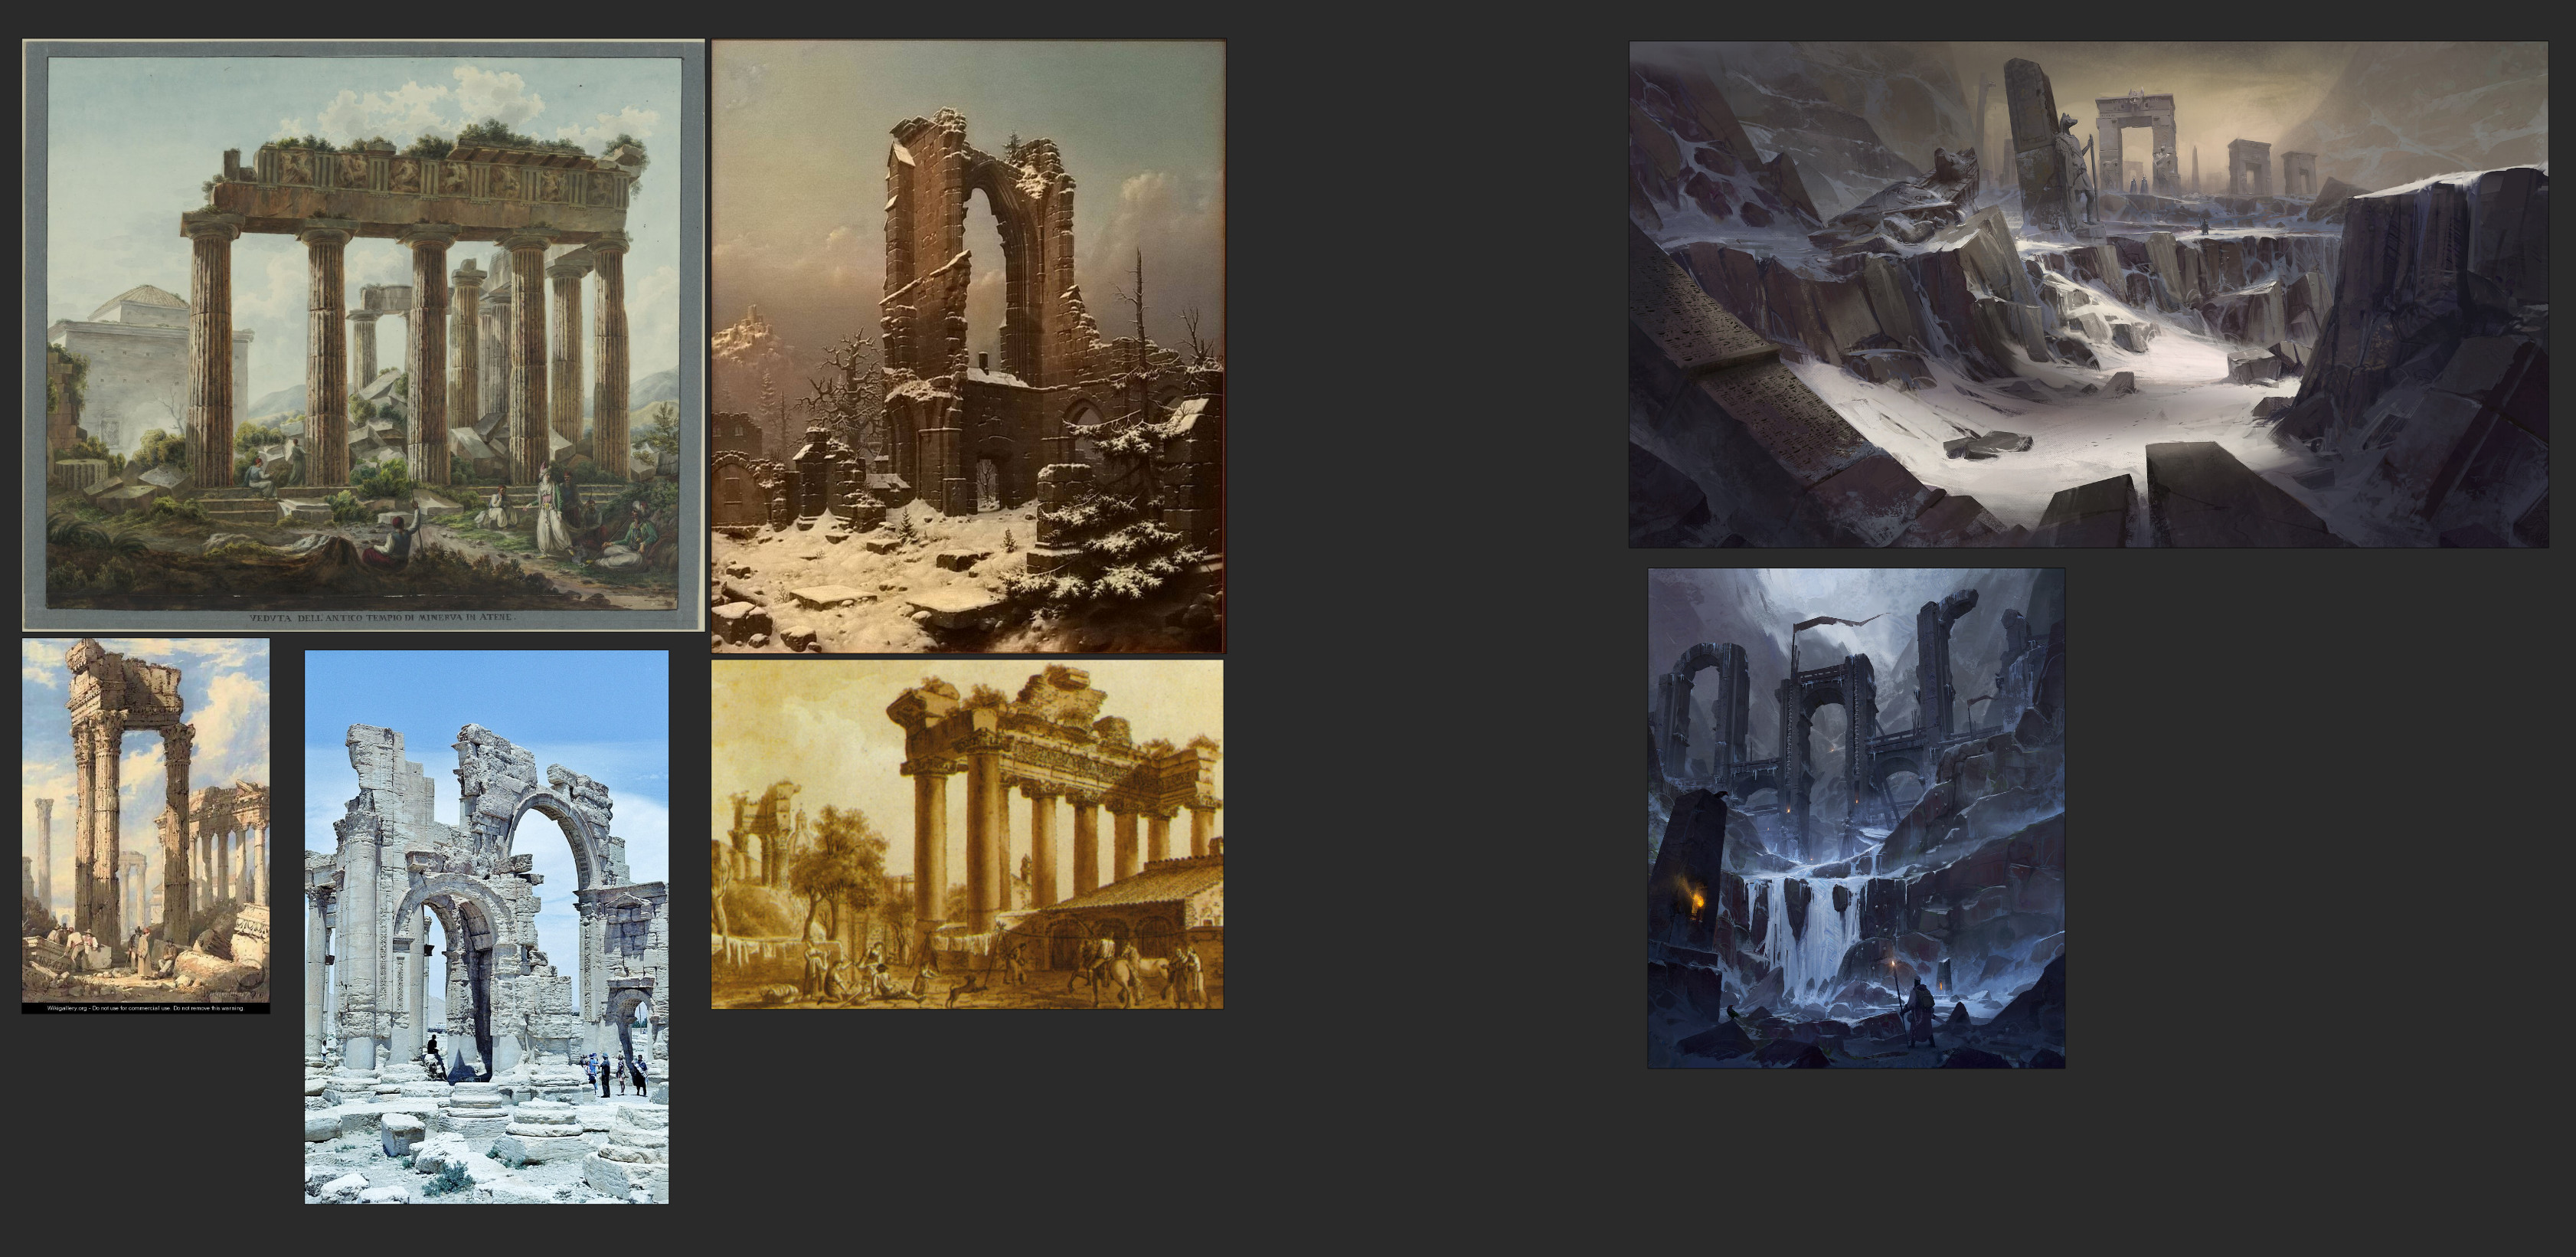 for this reference board, I tried to find concepts and painting that shows the man made columns and structure that can go well with the mountain composition.